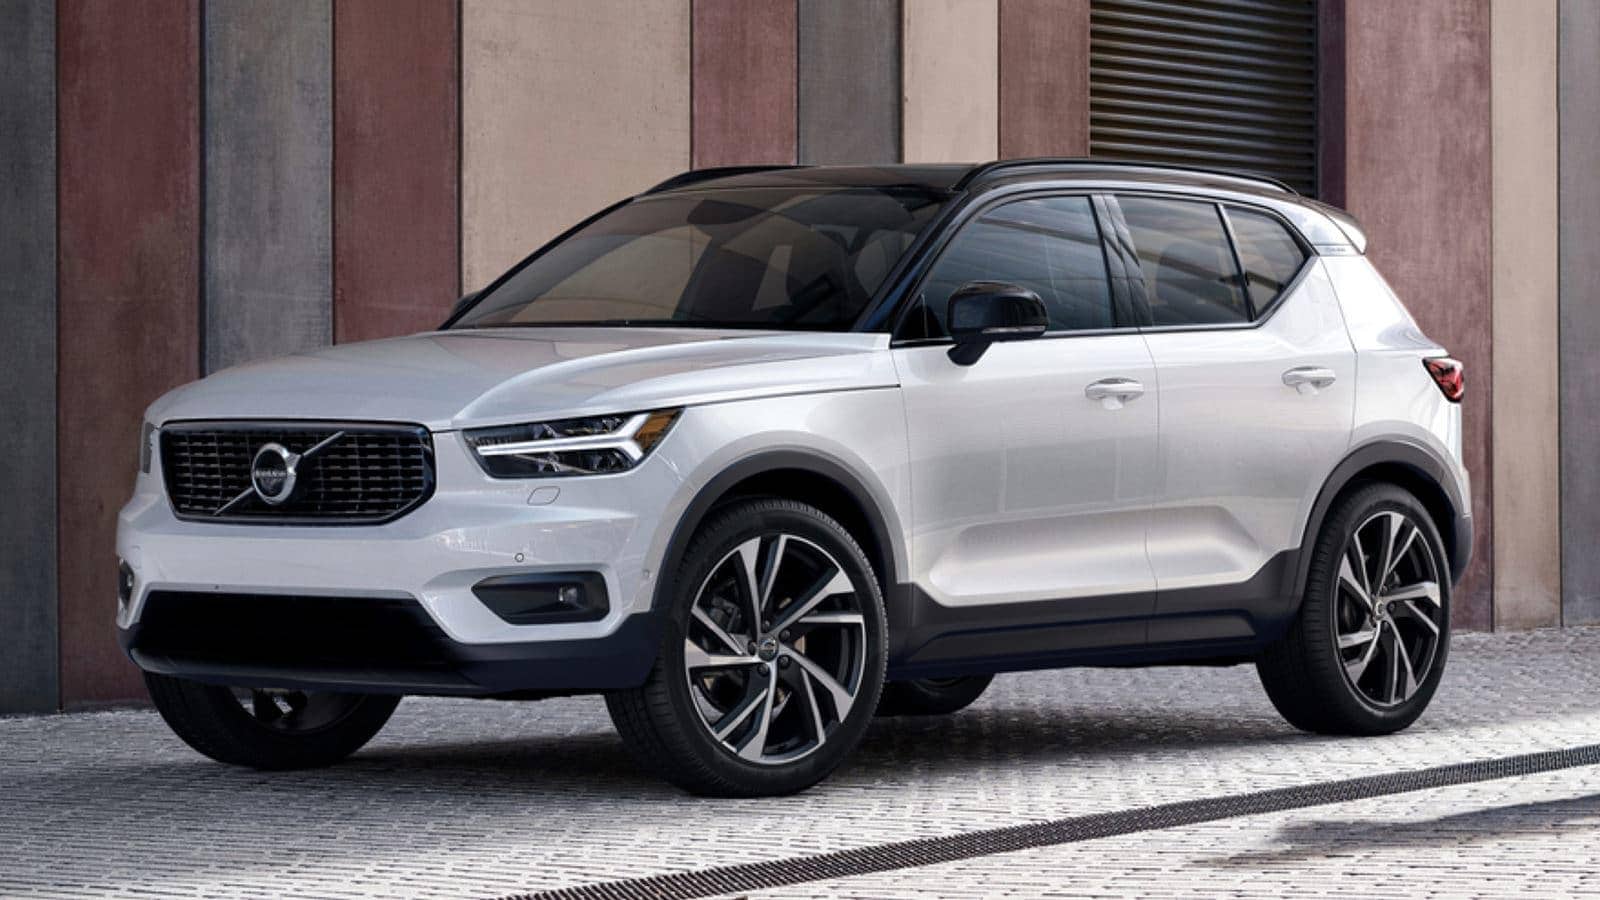 XC40 Compact Crossover SUV